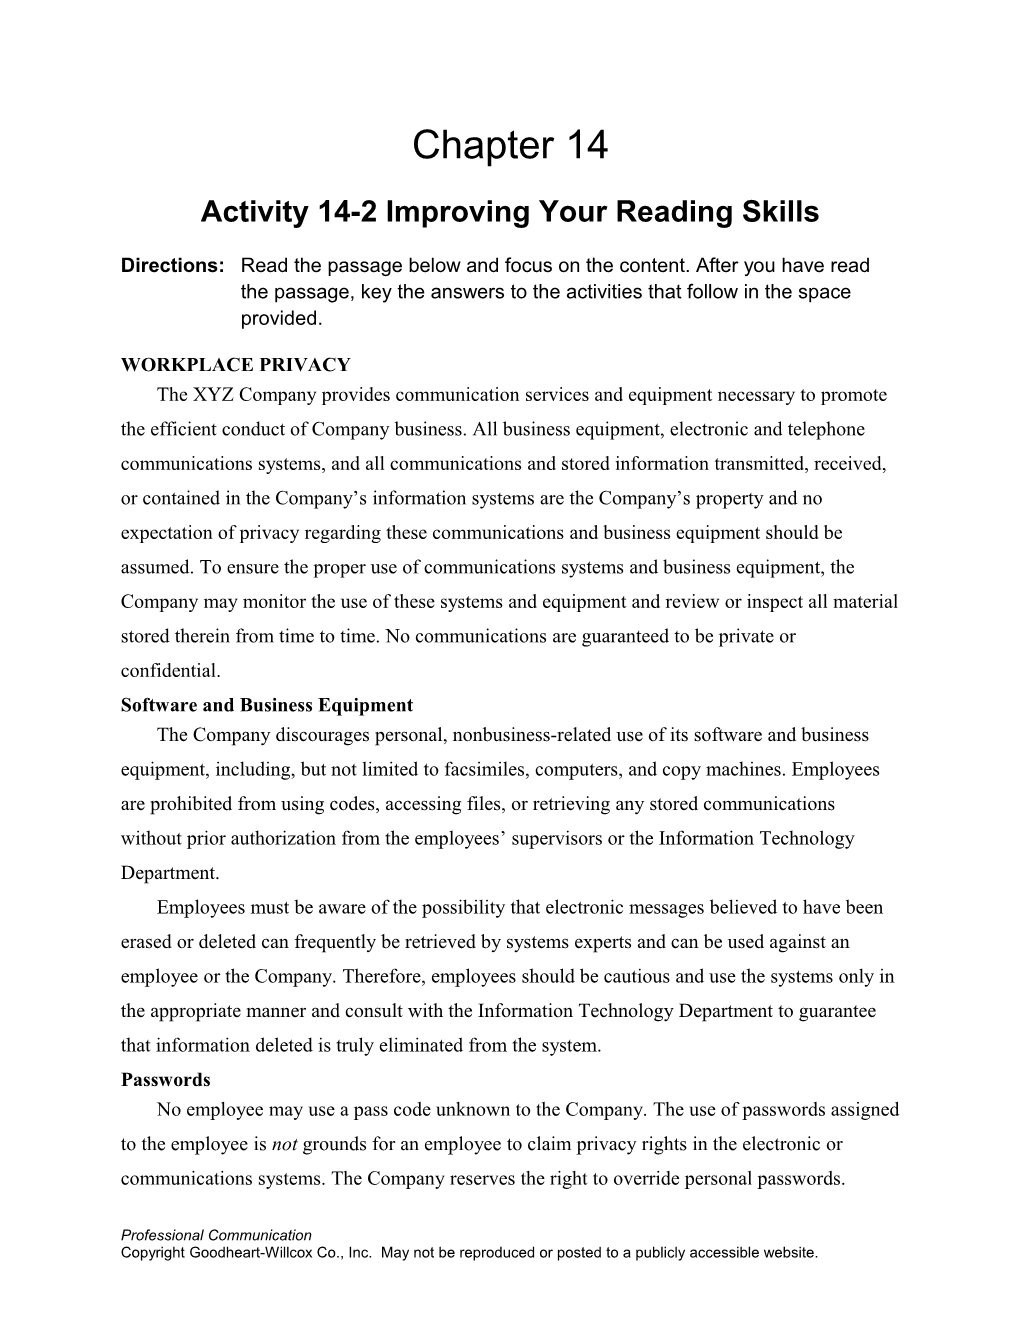 Activity 14-2Improving Your Reading Skills